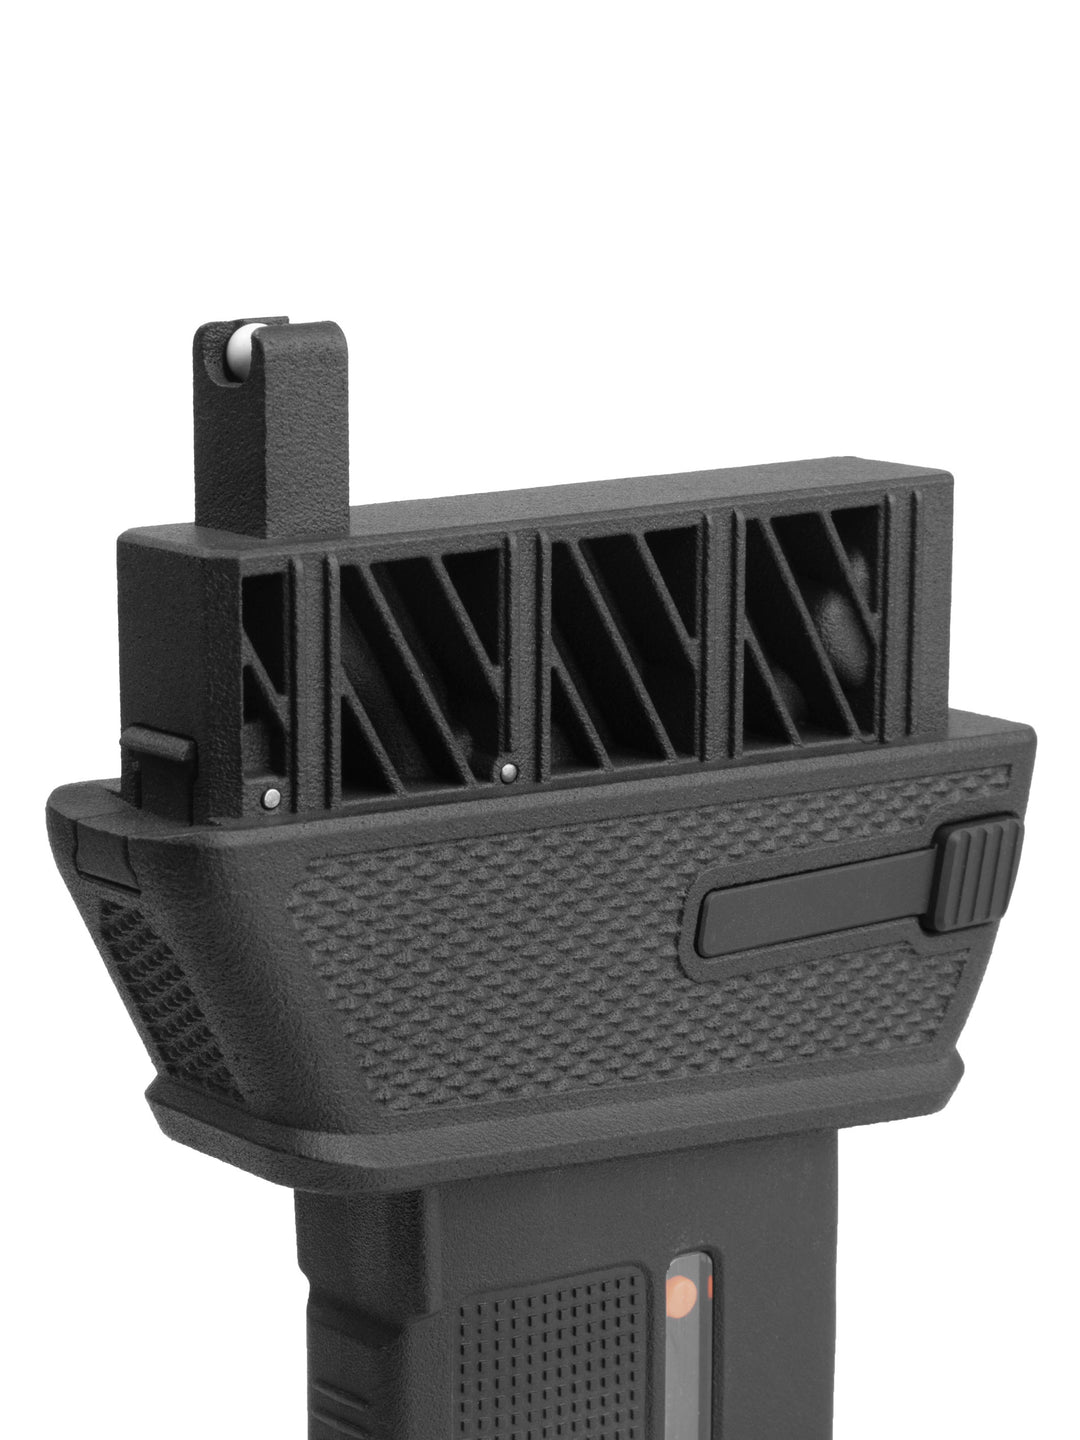 M4 Magazine Adapter for SSG24 / MOD24